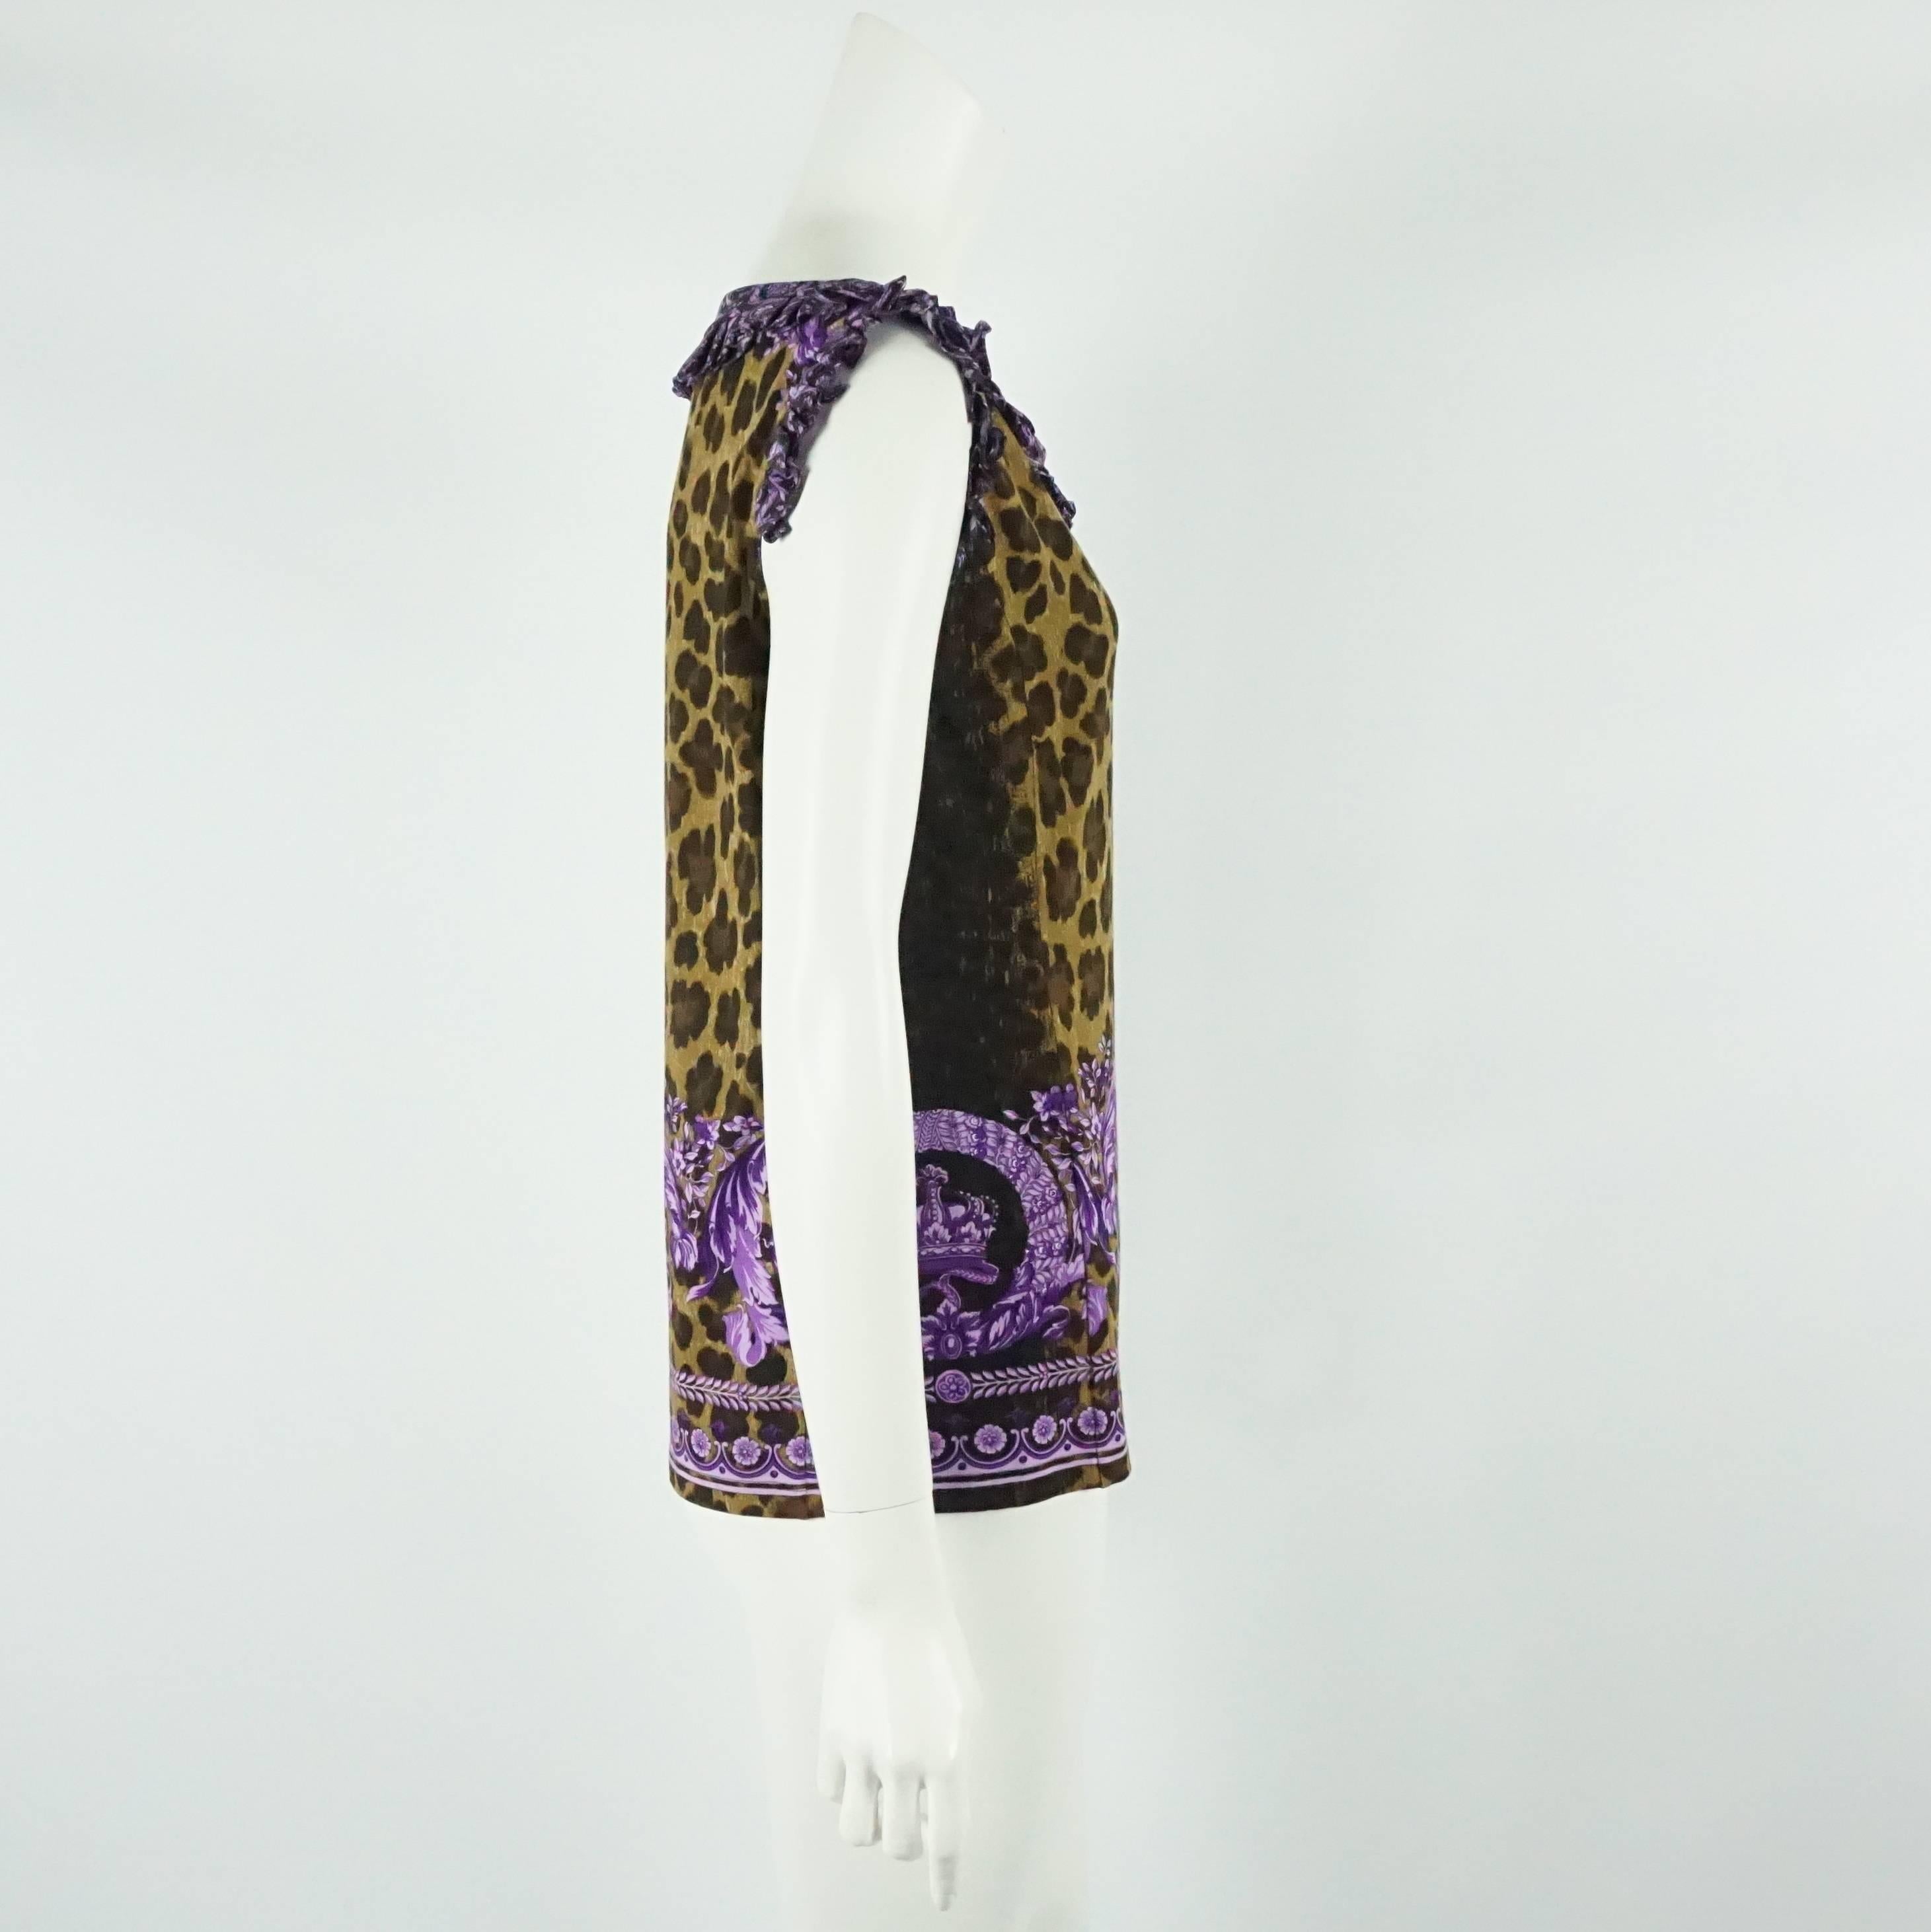 Versace Animal Print and Purple Cotton Top with Ruffles - XL. This top is unique and in excellent condition. It features a regal print on top of the animal print.

Measurements
Bust: 38